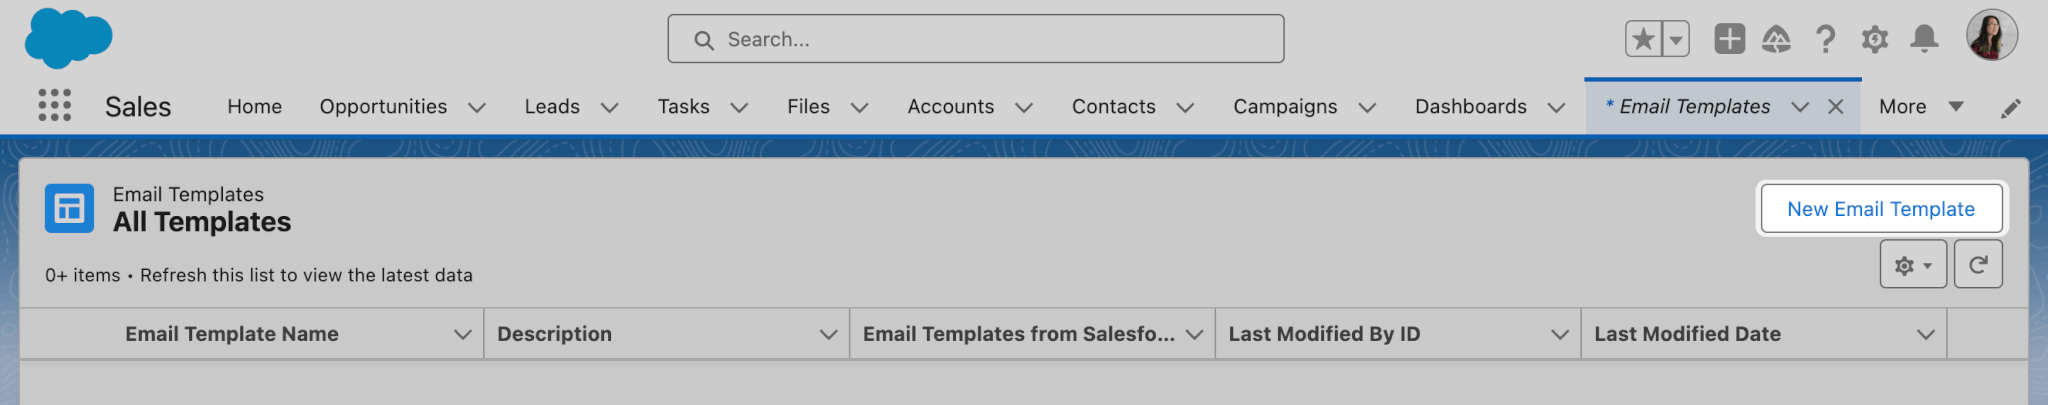 Salesforce Email Template list view with Add New button highlighted